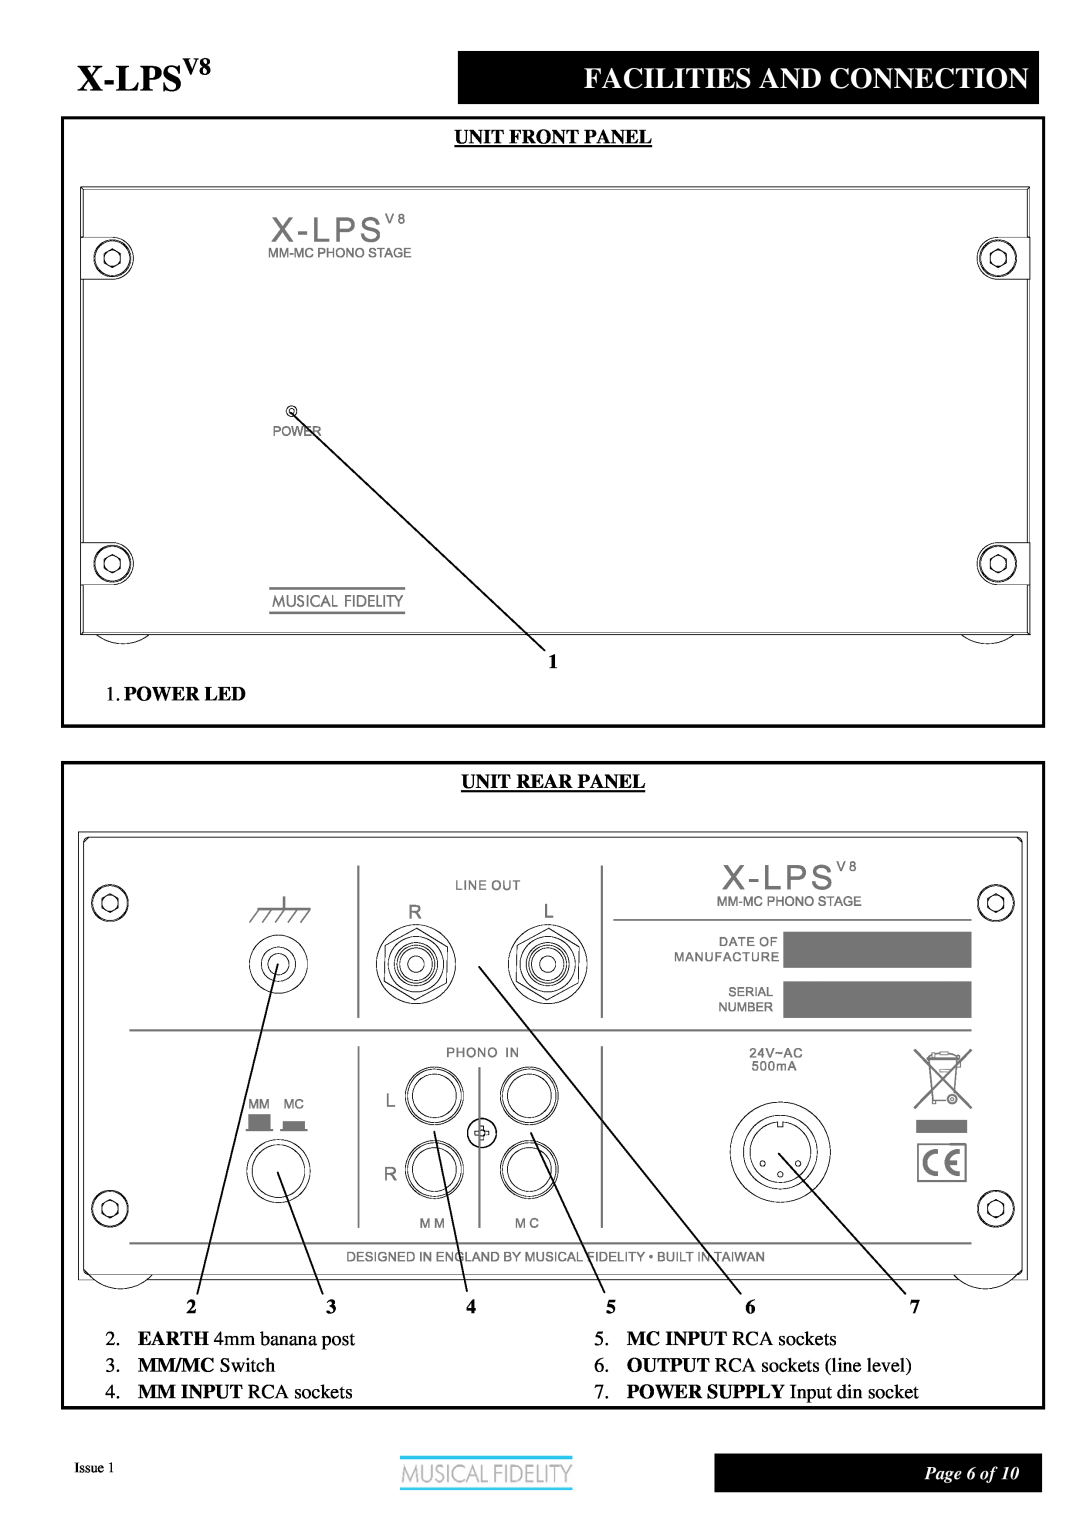 Musical Fidelity X-LPSV8 manual Facilities And Connection 